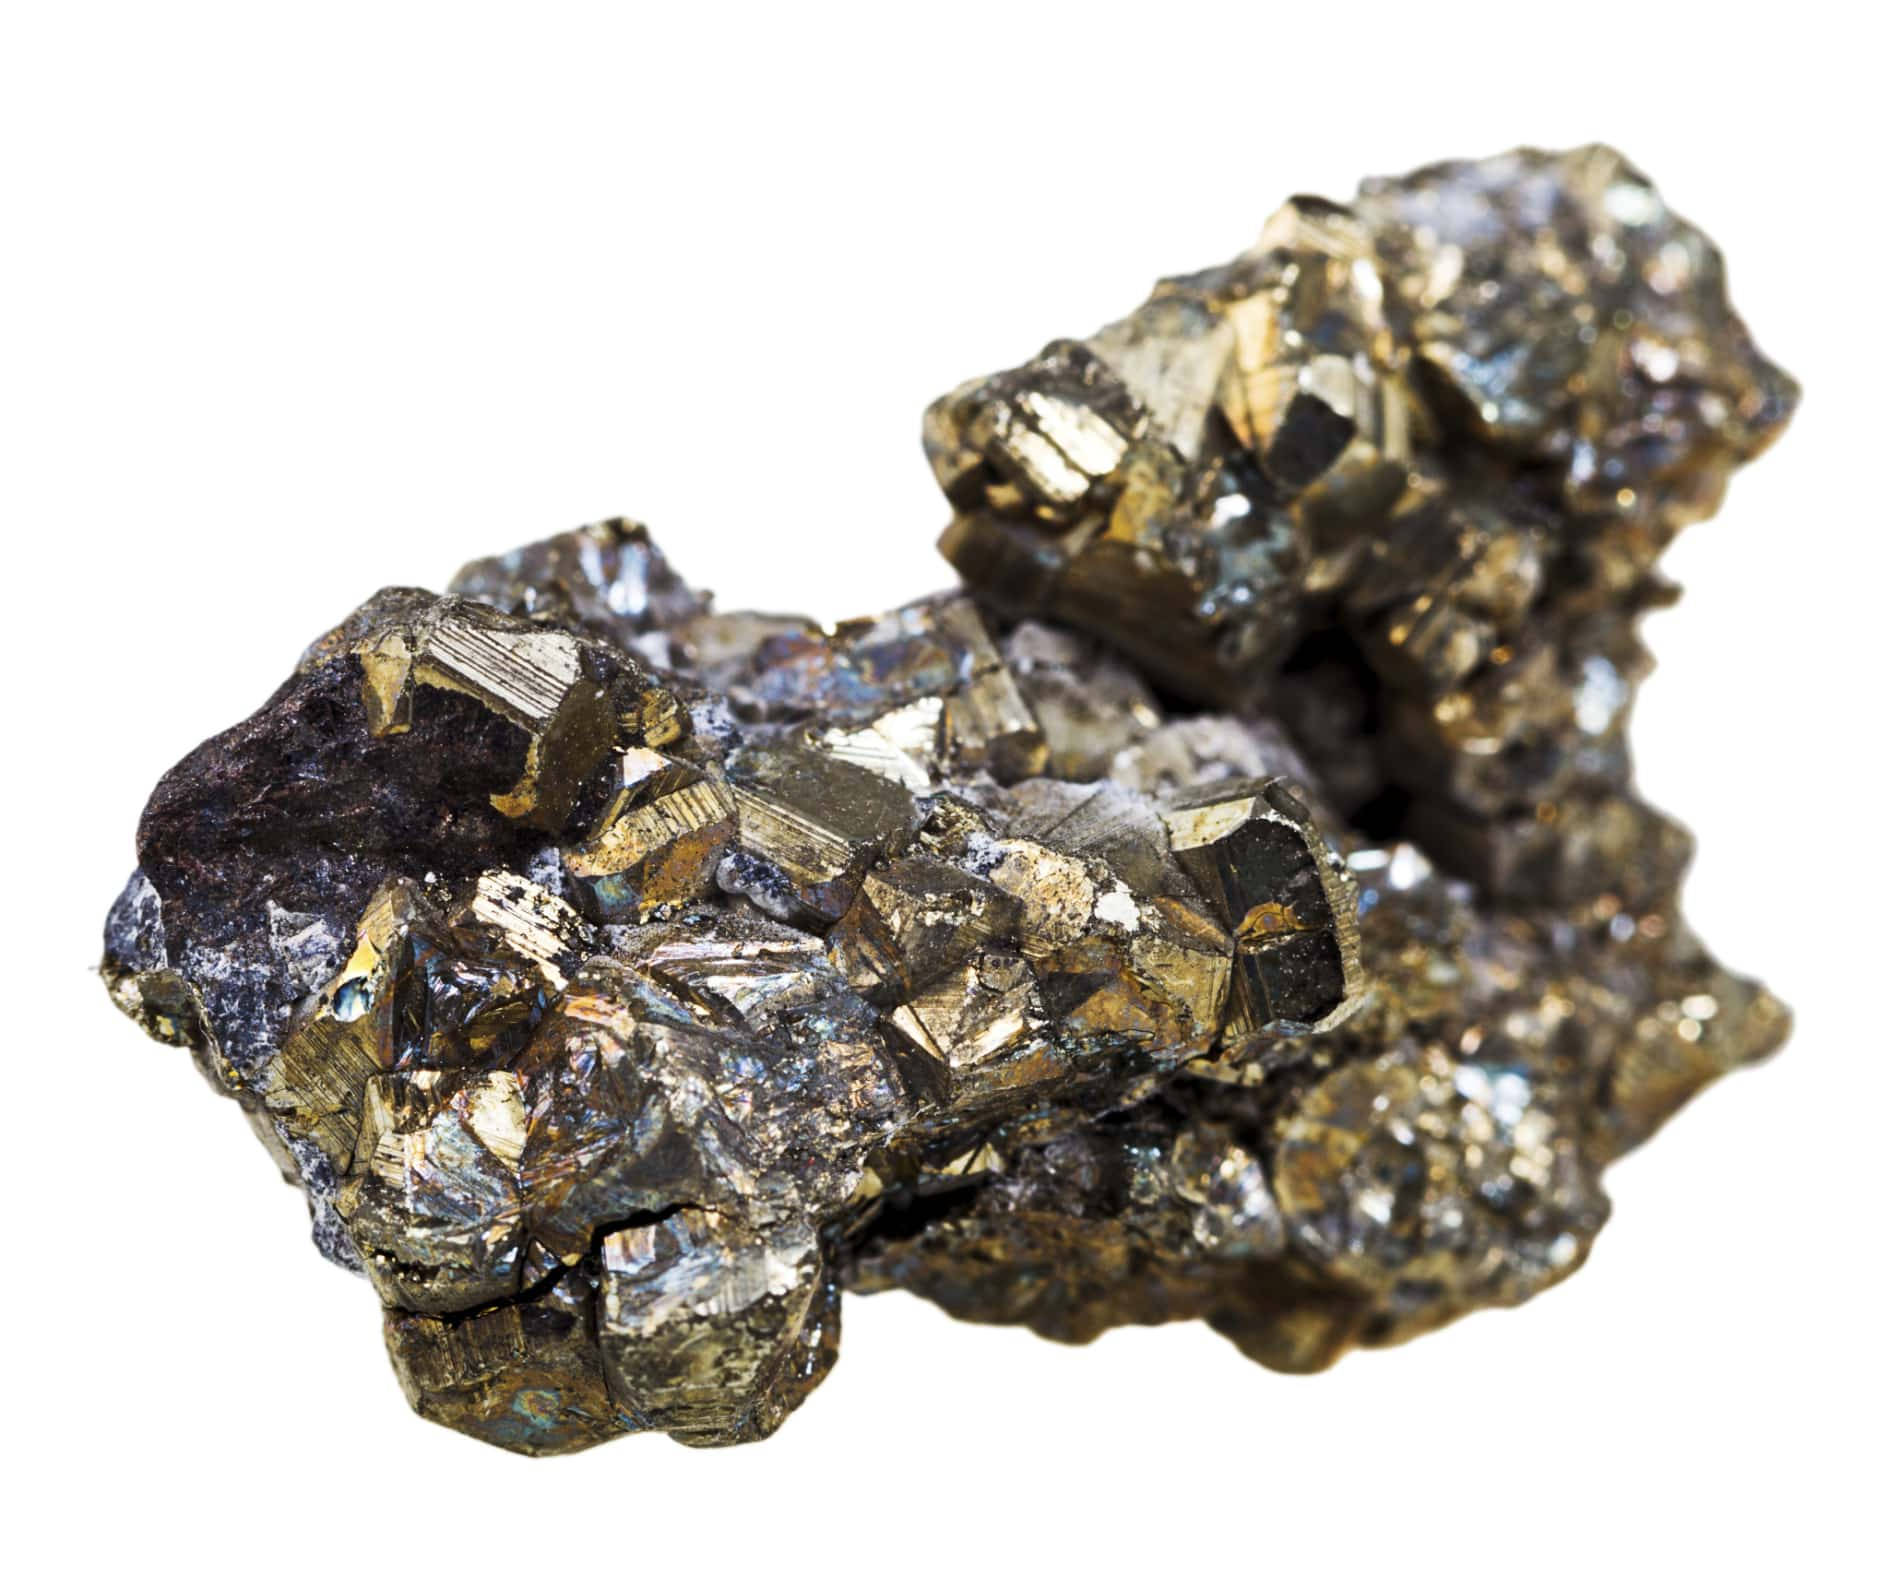 Pyrite That Contains Iron Up-close Picture